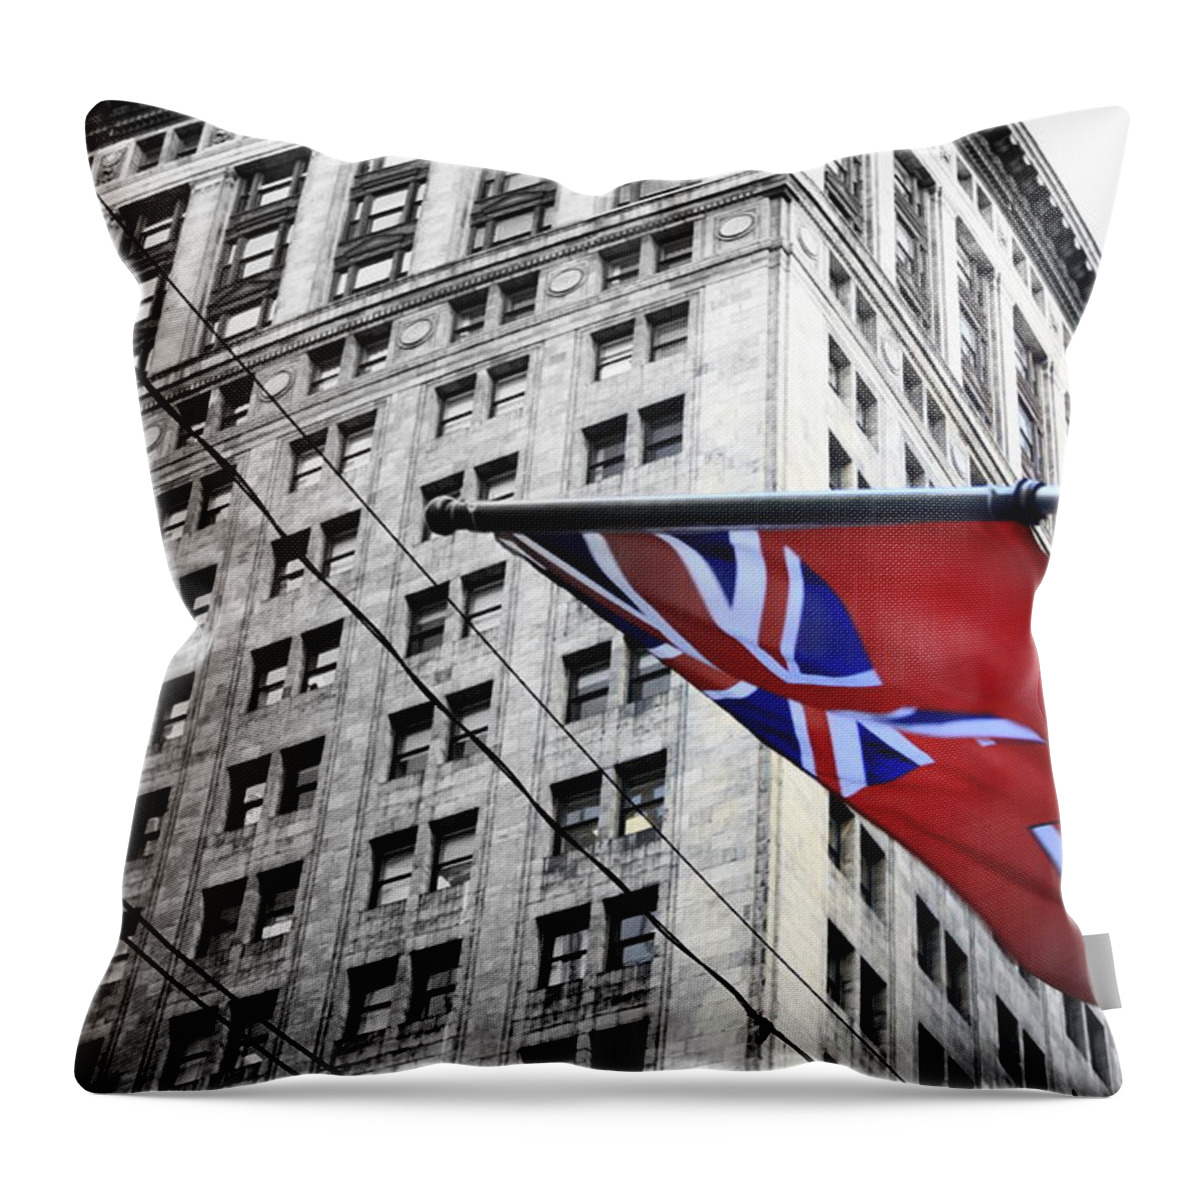 Ontario Throw Pillow featuring the photograph Ontario Flag by Valentino Visentini